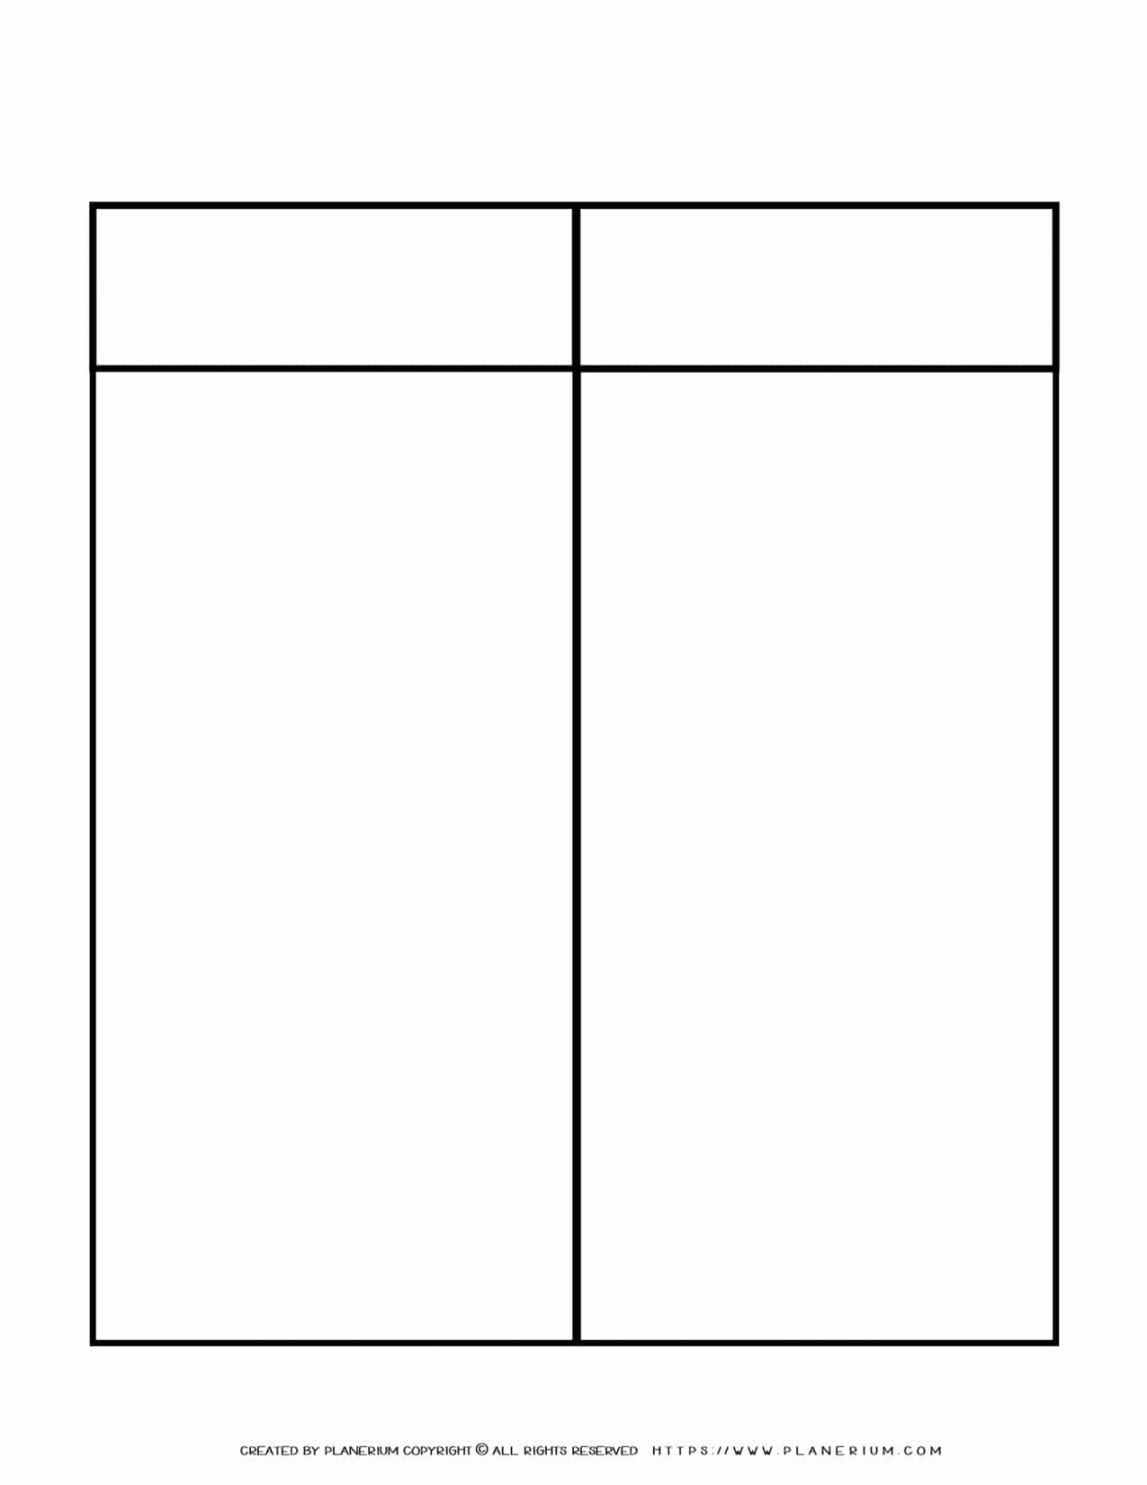 Graphic Organizer Templates - Two Columns One Row Chart  Planerium - FREE Printables - Two Column Chart